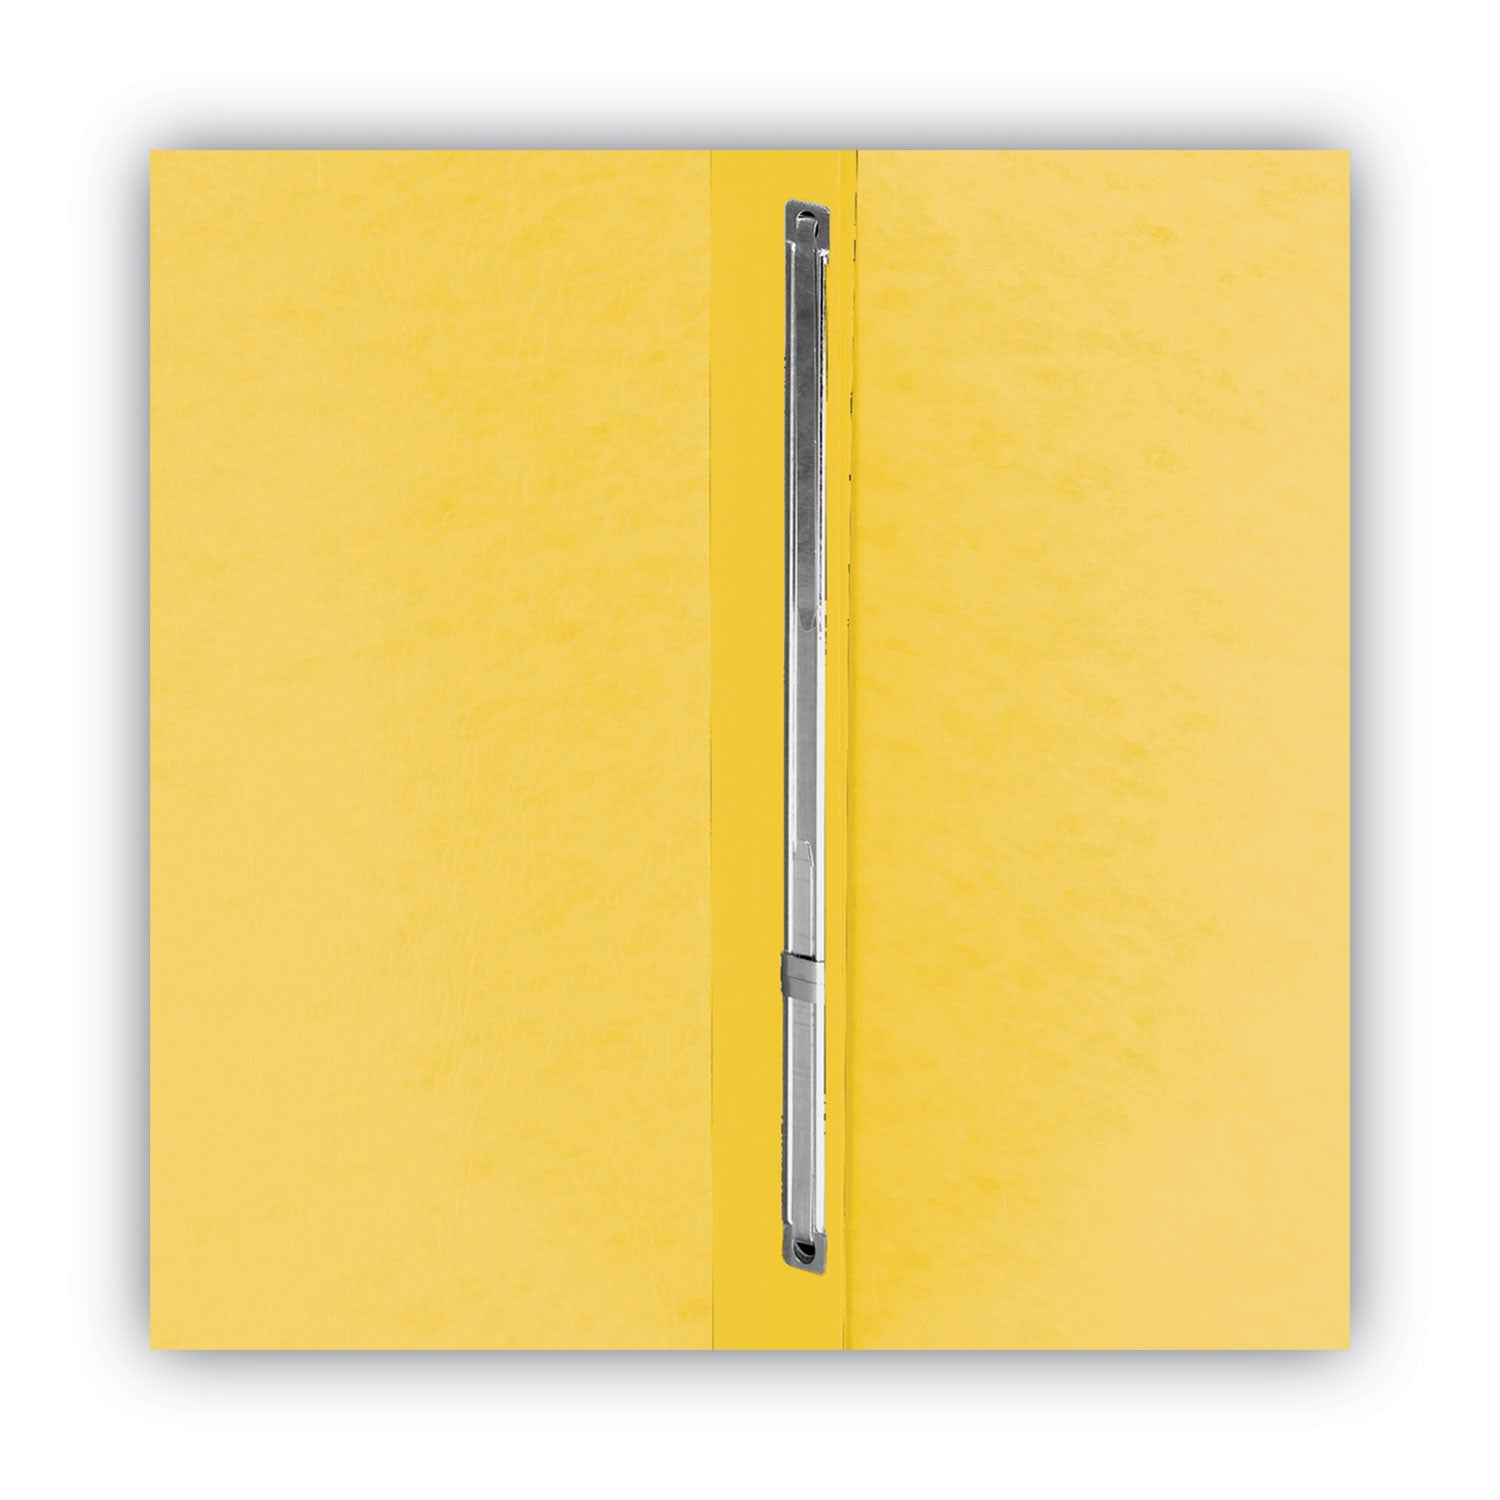 Prong Fastener Premium Pressboard Report Cover, Two-Piece Prong Fastener, 3" Capacity, 8.5 x 11, Yellow/Yellow - 